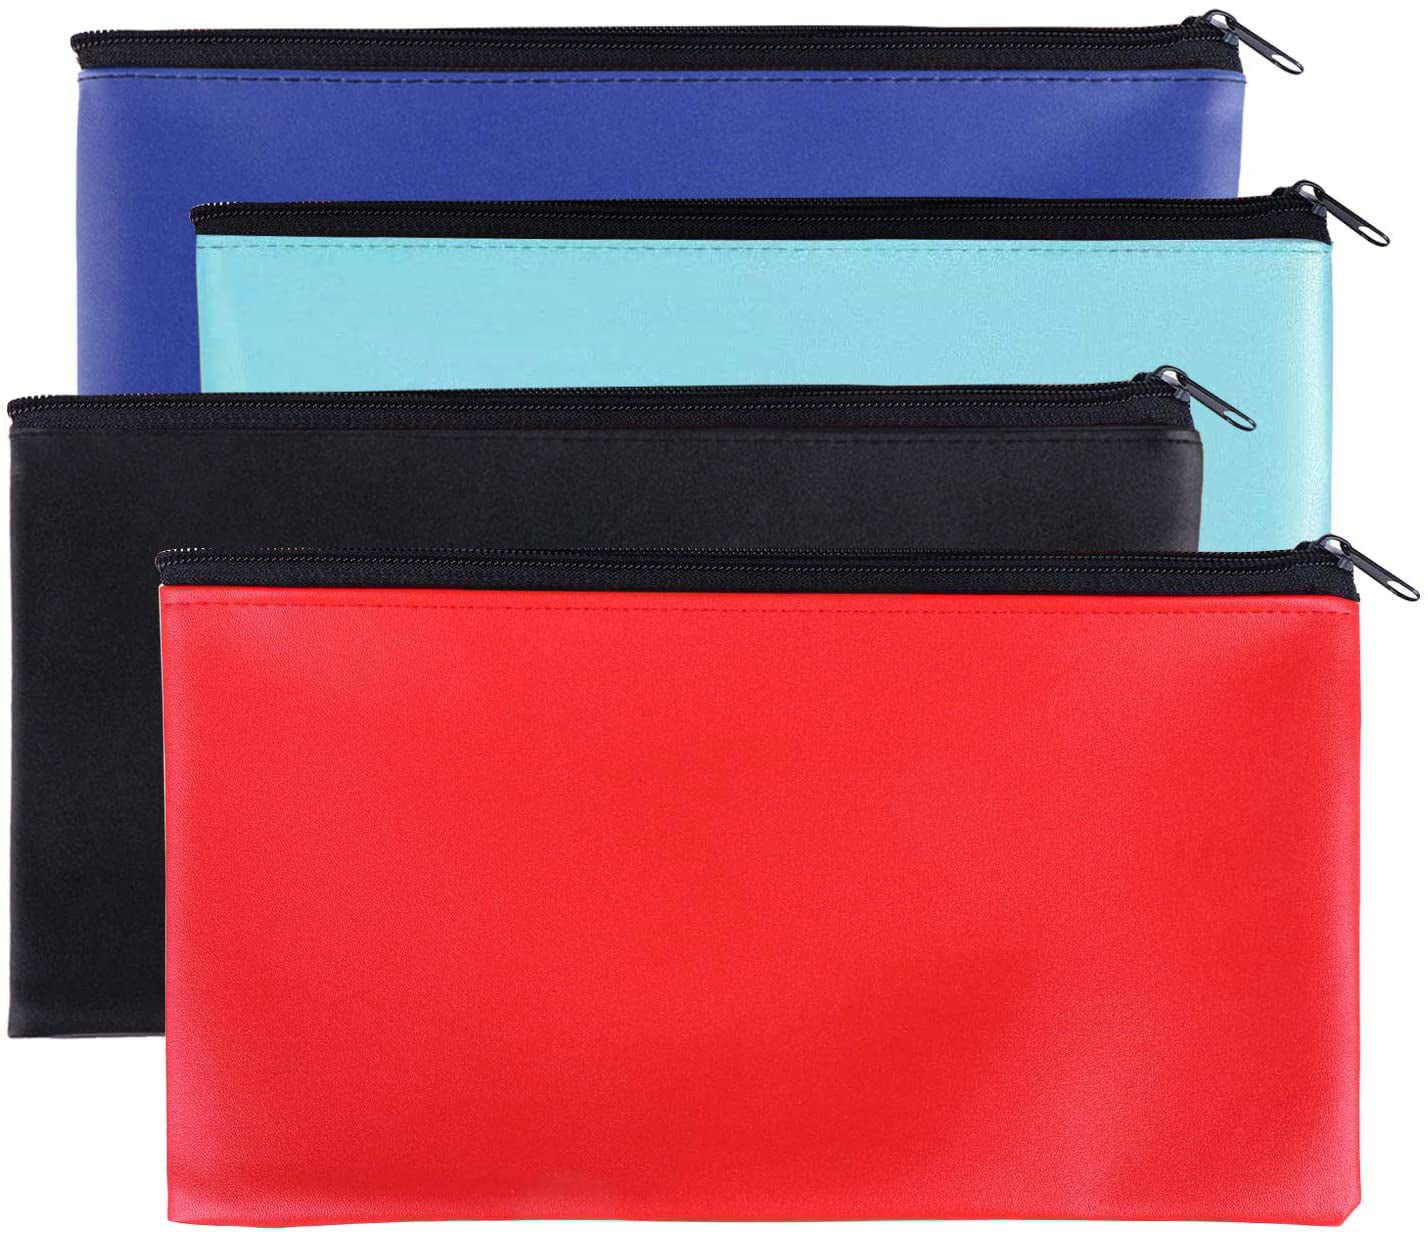 Zipper Bank Bags,6 Pack Money Pouch Bank Deposit Bag PU Leather Cash and Coin Pouch Bank envelopes with Zipper Colorful 